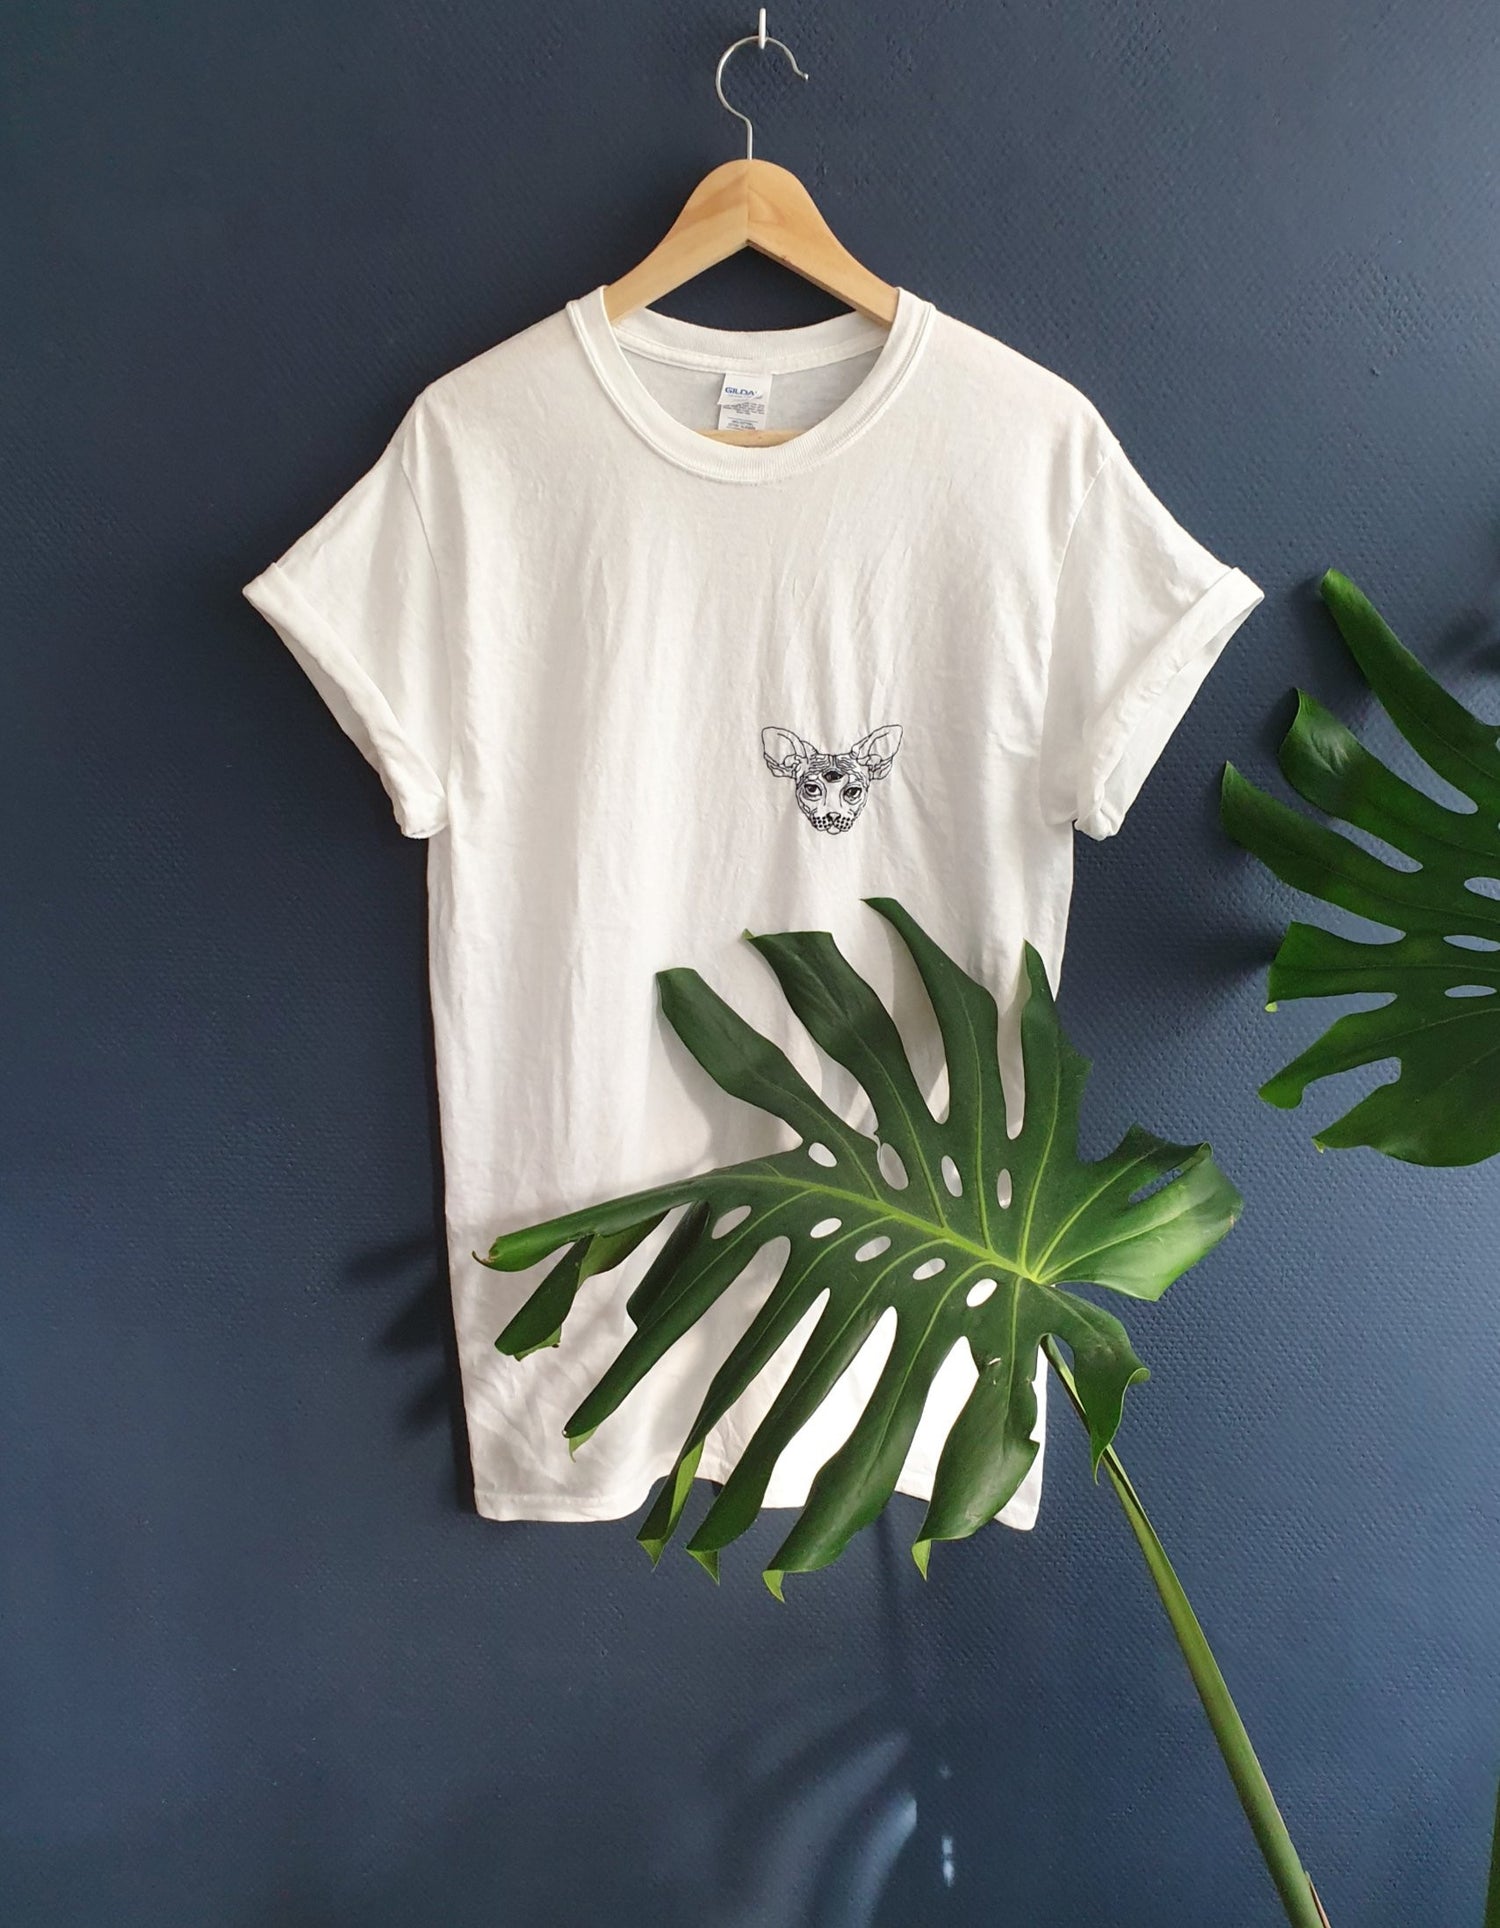 Hand Embroidered Magic Cat Shirt -  Spacy Shirts